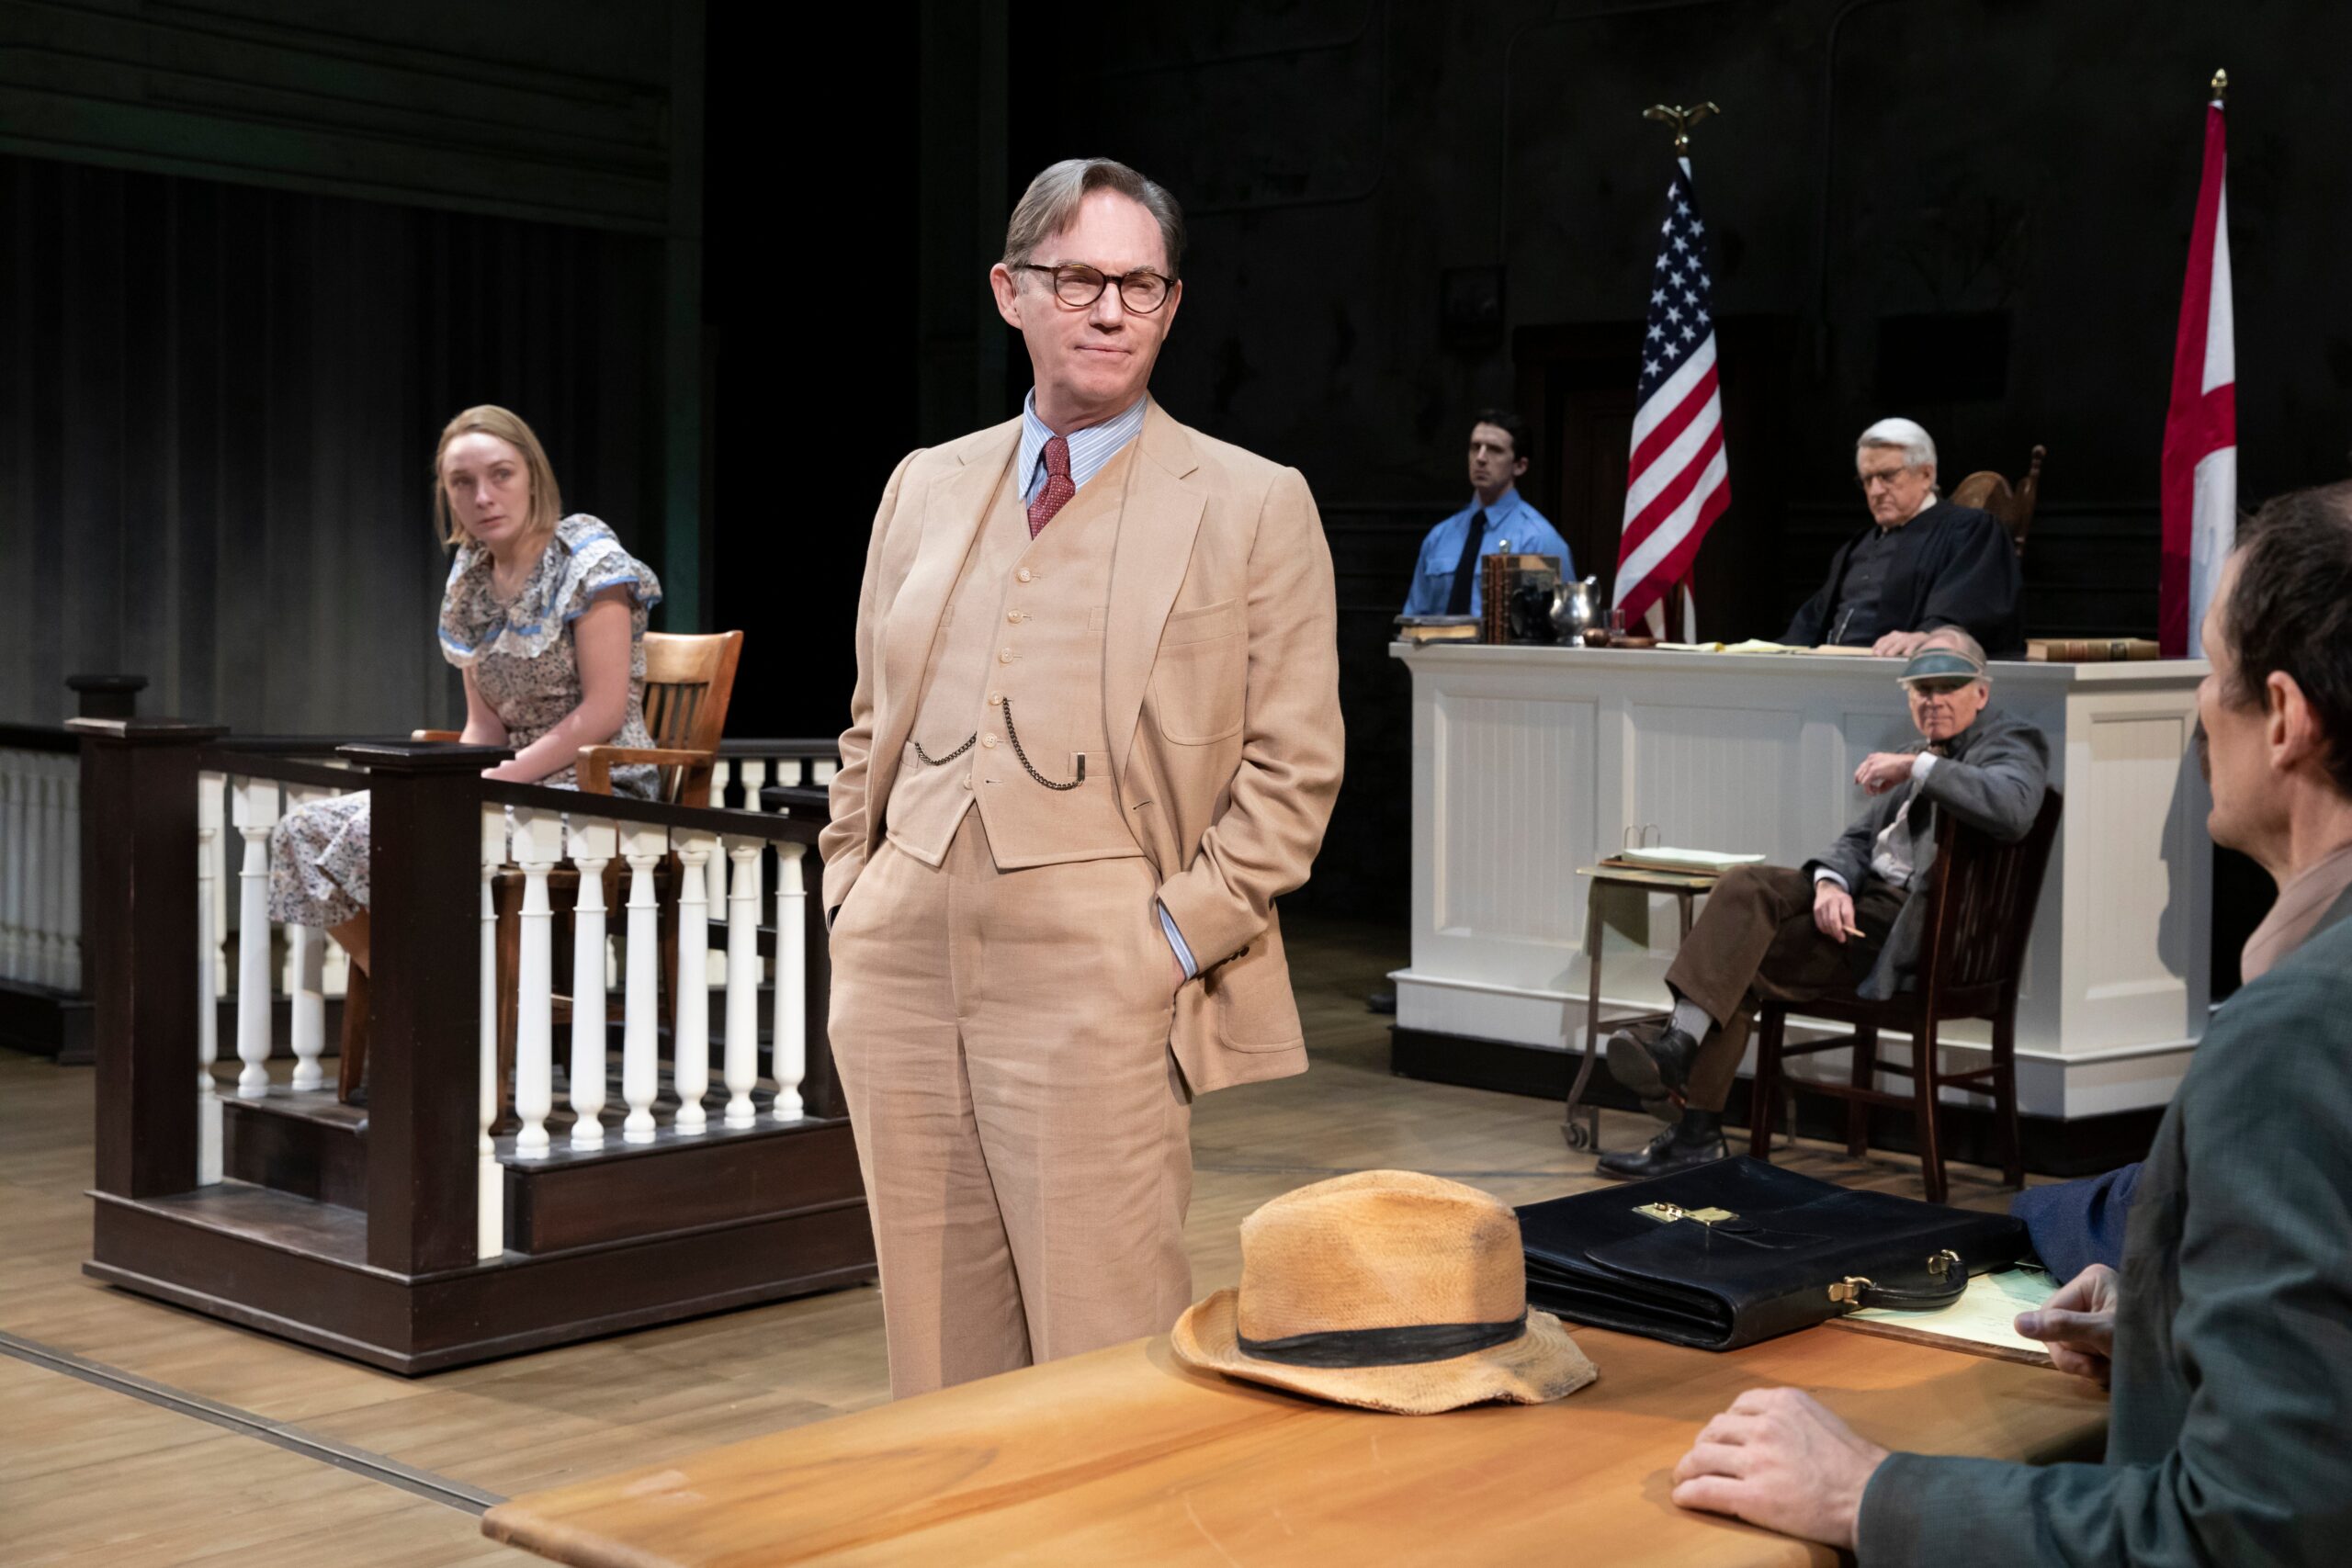 ￼A NEW ‘MOCKINGBIRD’ TAKES THE STAGE AT SORKIN’S HAND